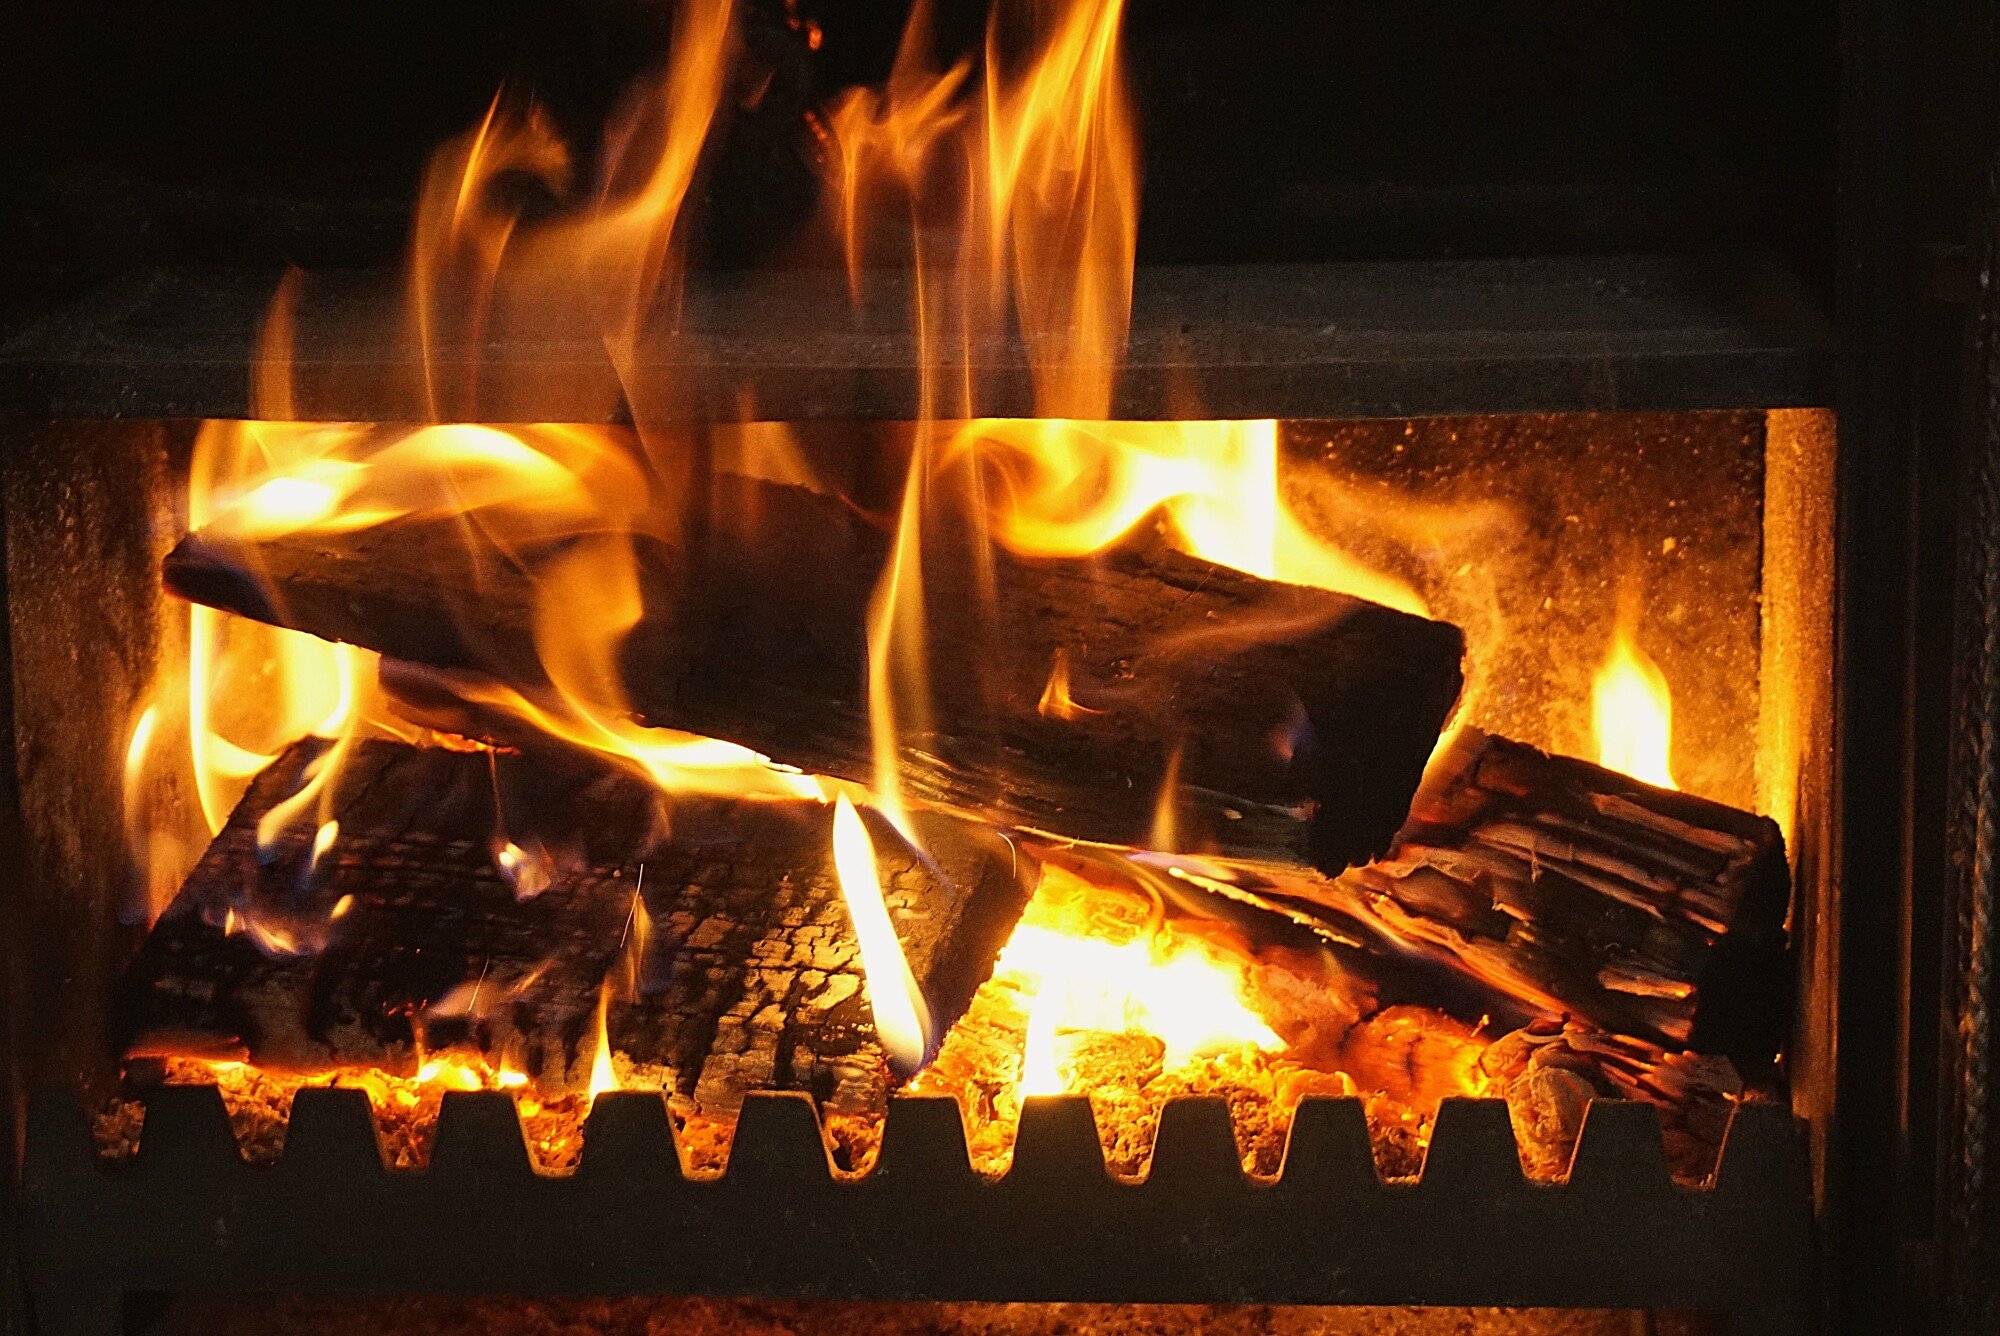 Discover the advantages of pellet stove insert for fireplaces! Learn about cost efficiency, eco-friendly heating, and enhanced warmth.